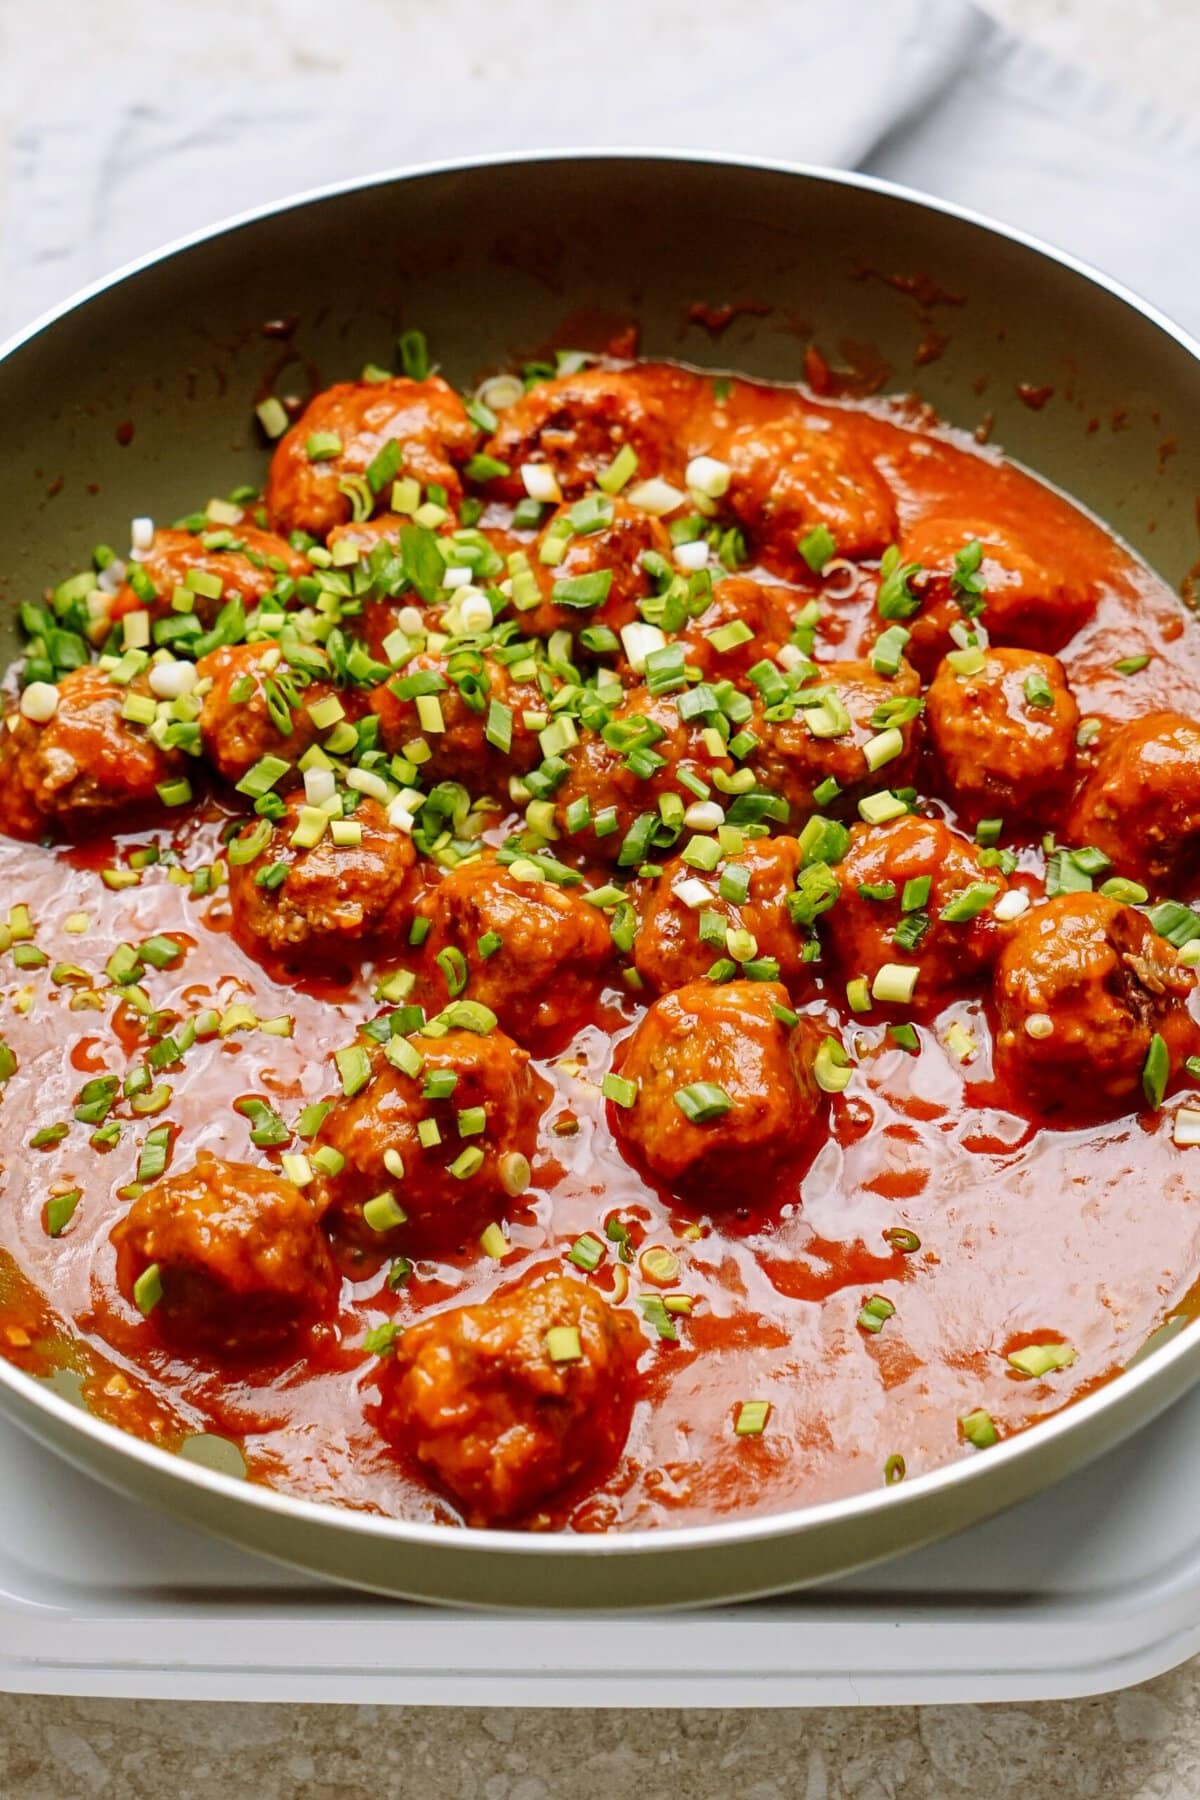 Meatballs in sauce garnished with chopped green onions.